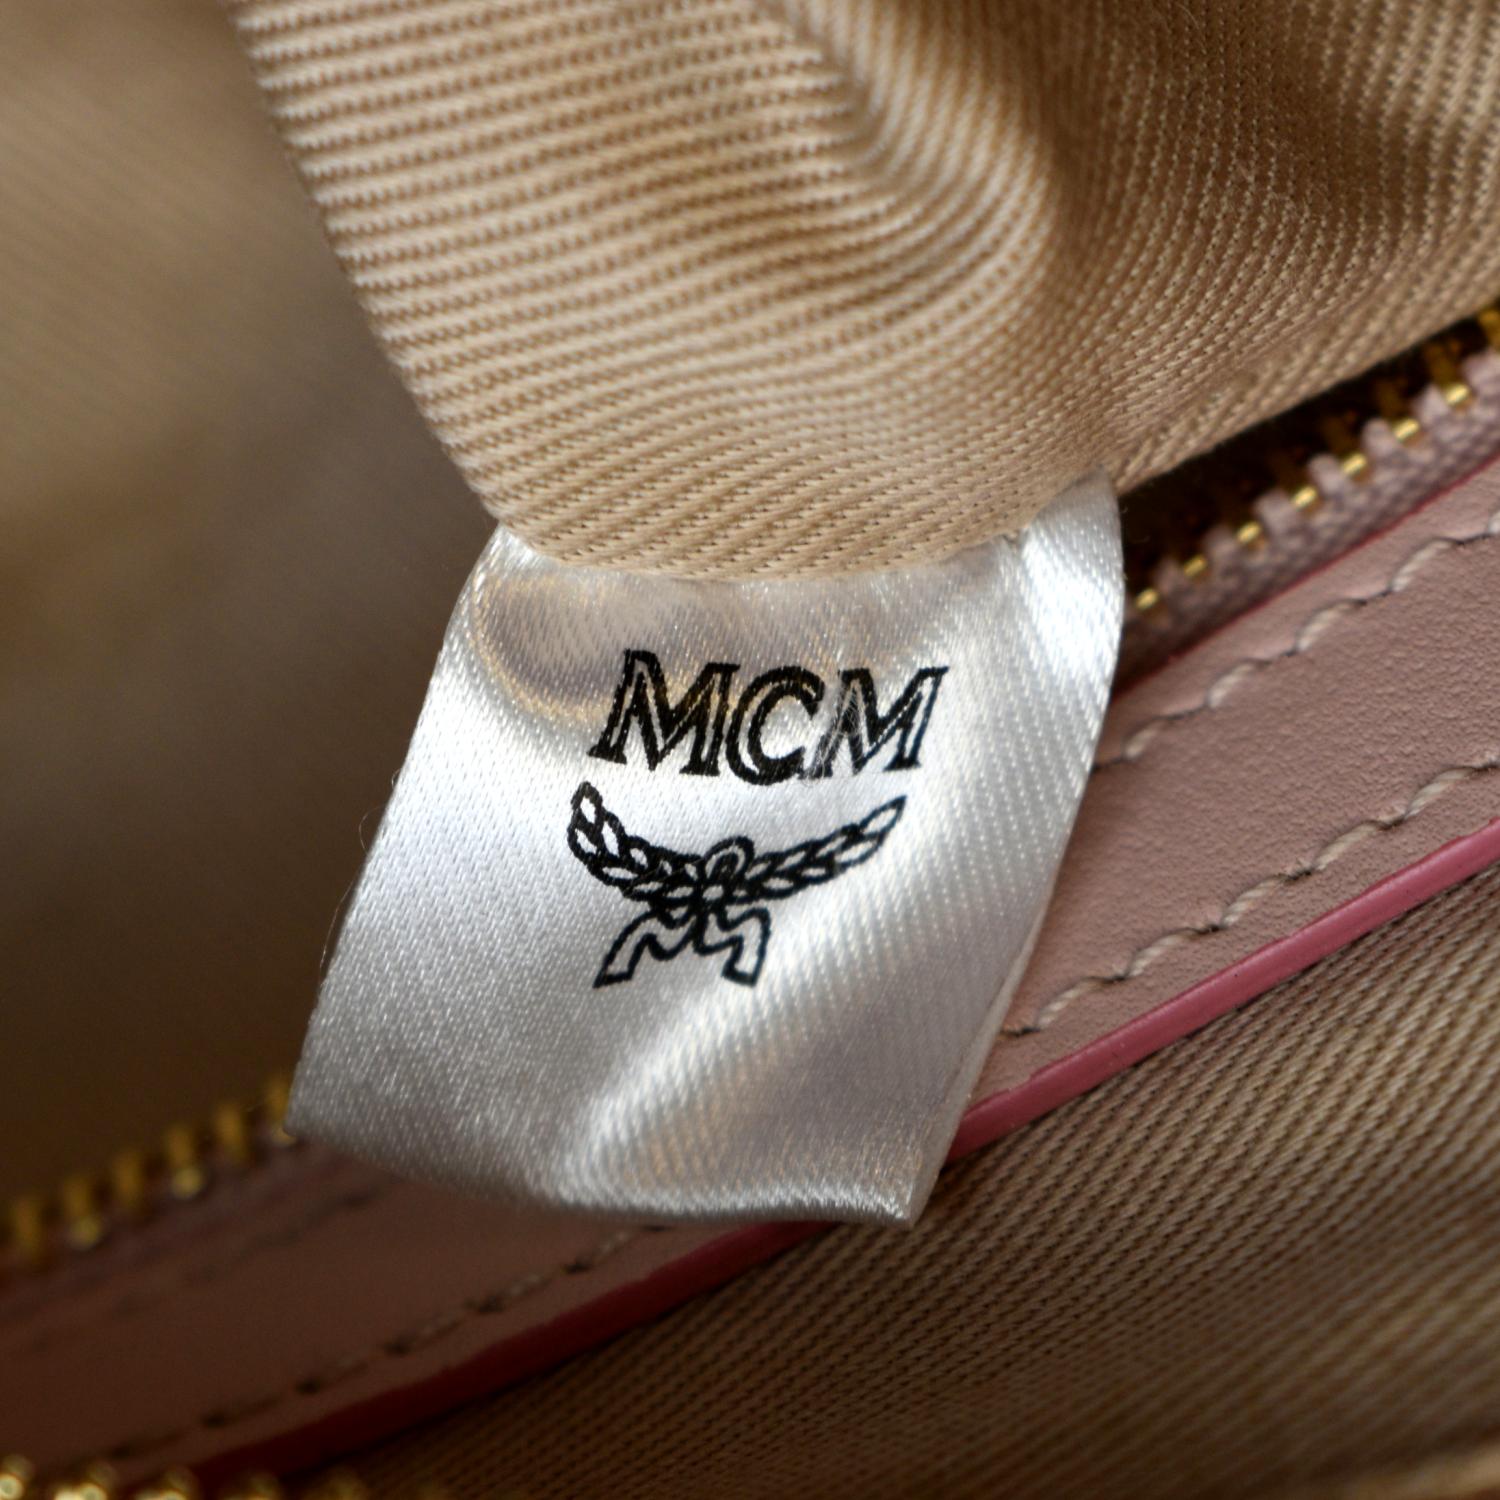 MCM Name Tag Crossbody Bags for Women